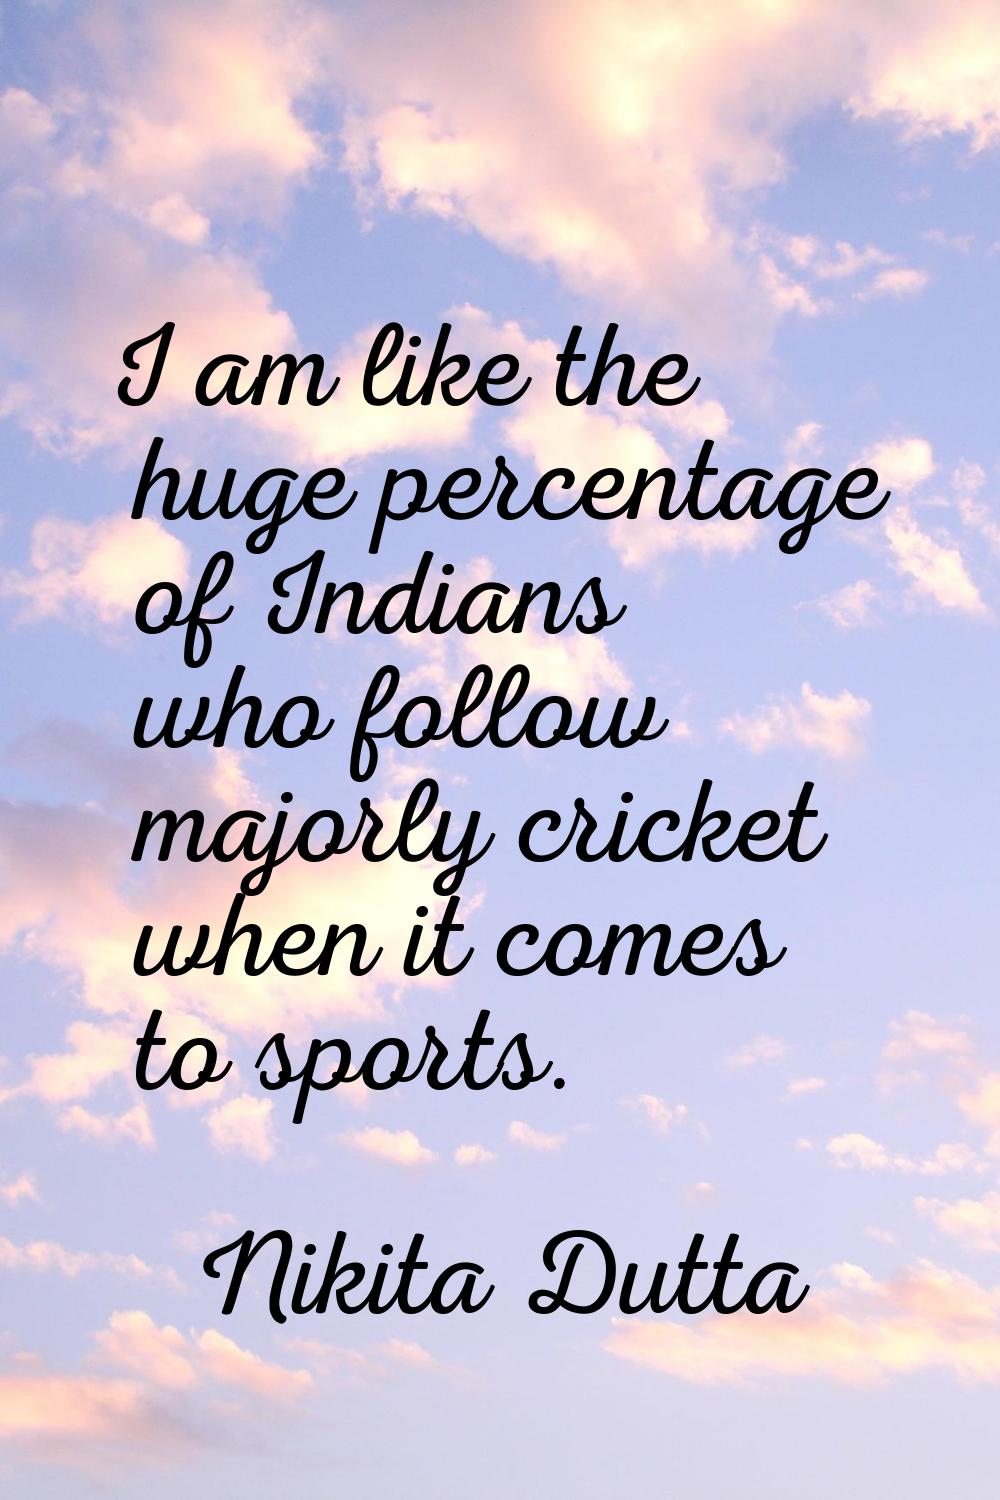 I am like the huge percentage of Indians who follow majorly cricket when it comes to sports.